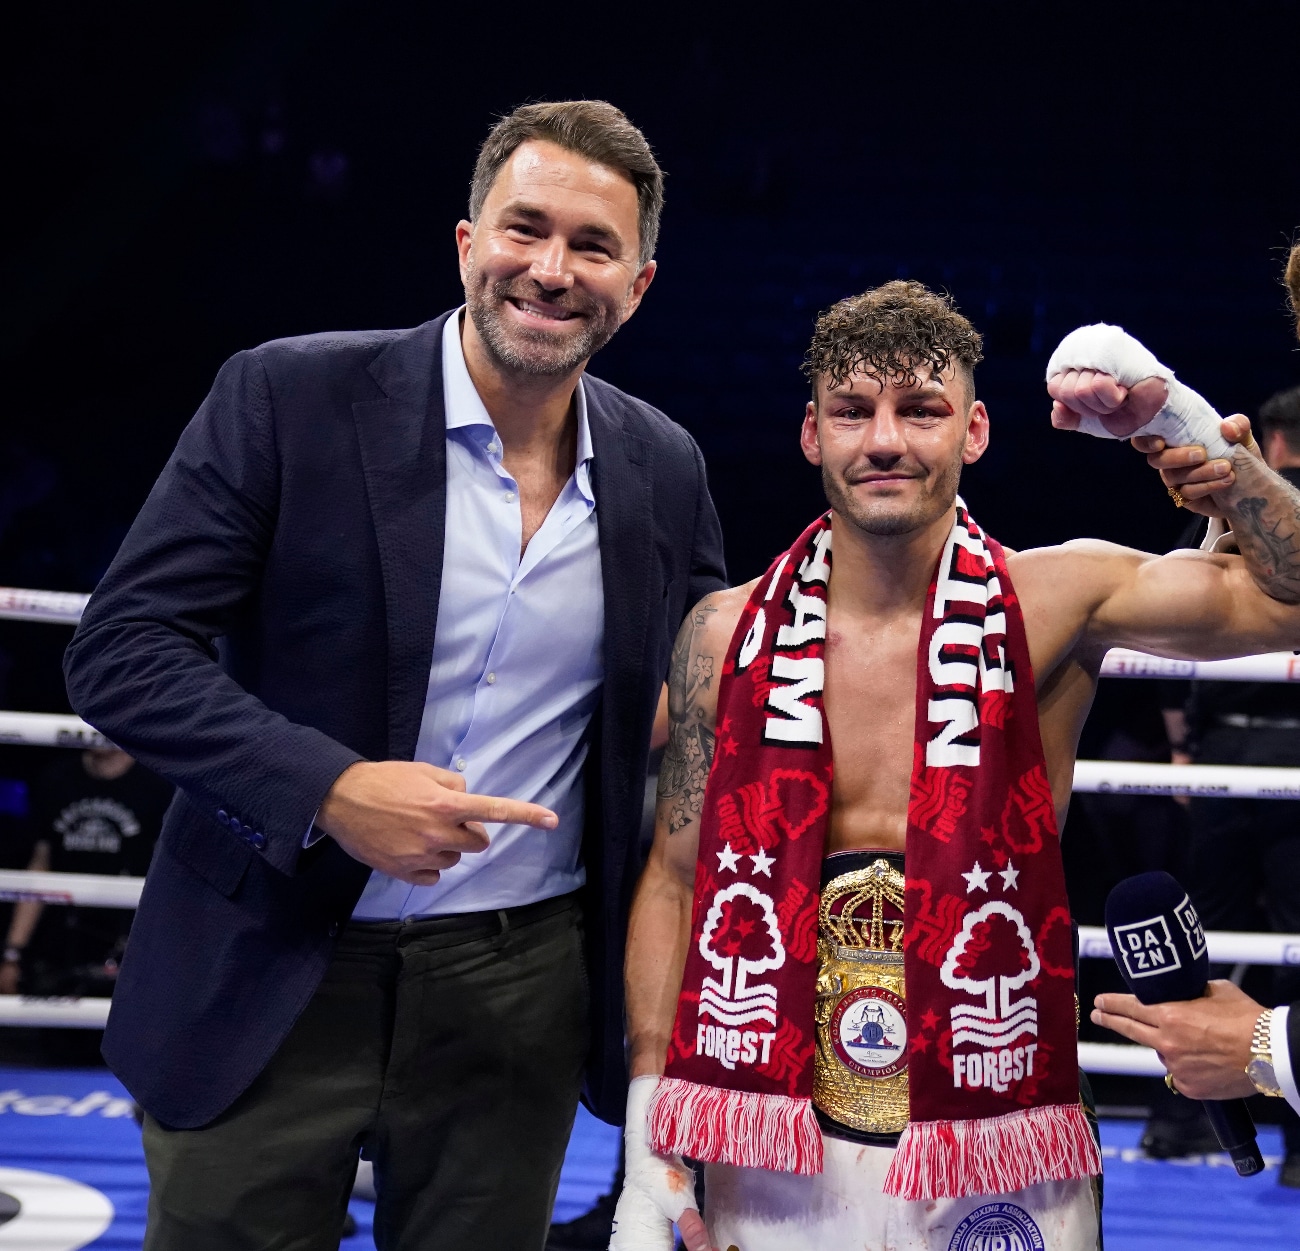 Eddie Hearn Wants Leigh Wood To Fight Warrington Next - Boxing News